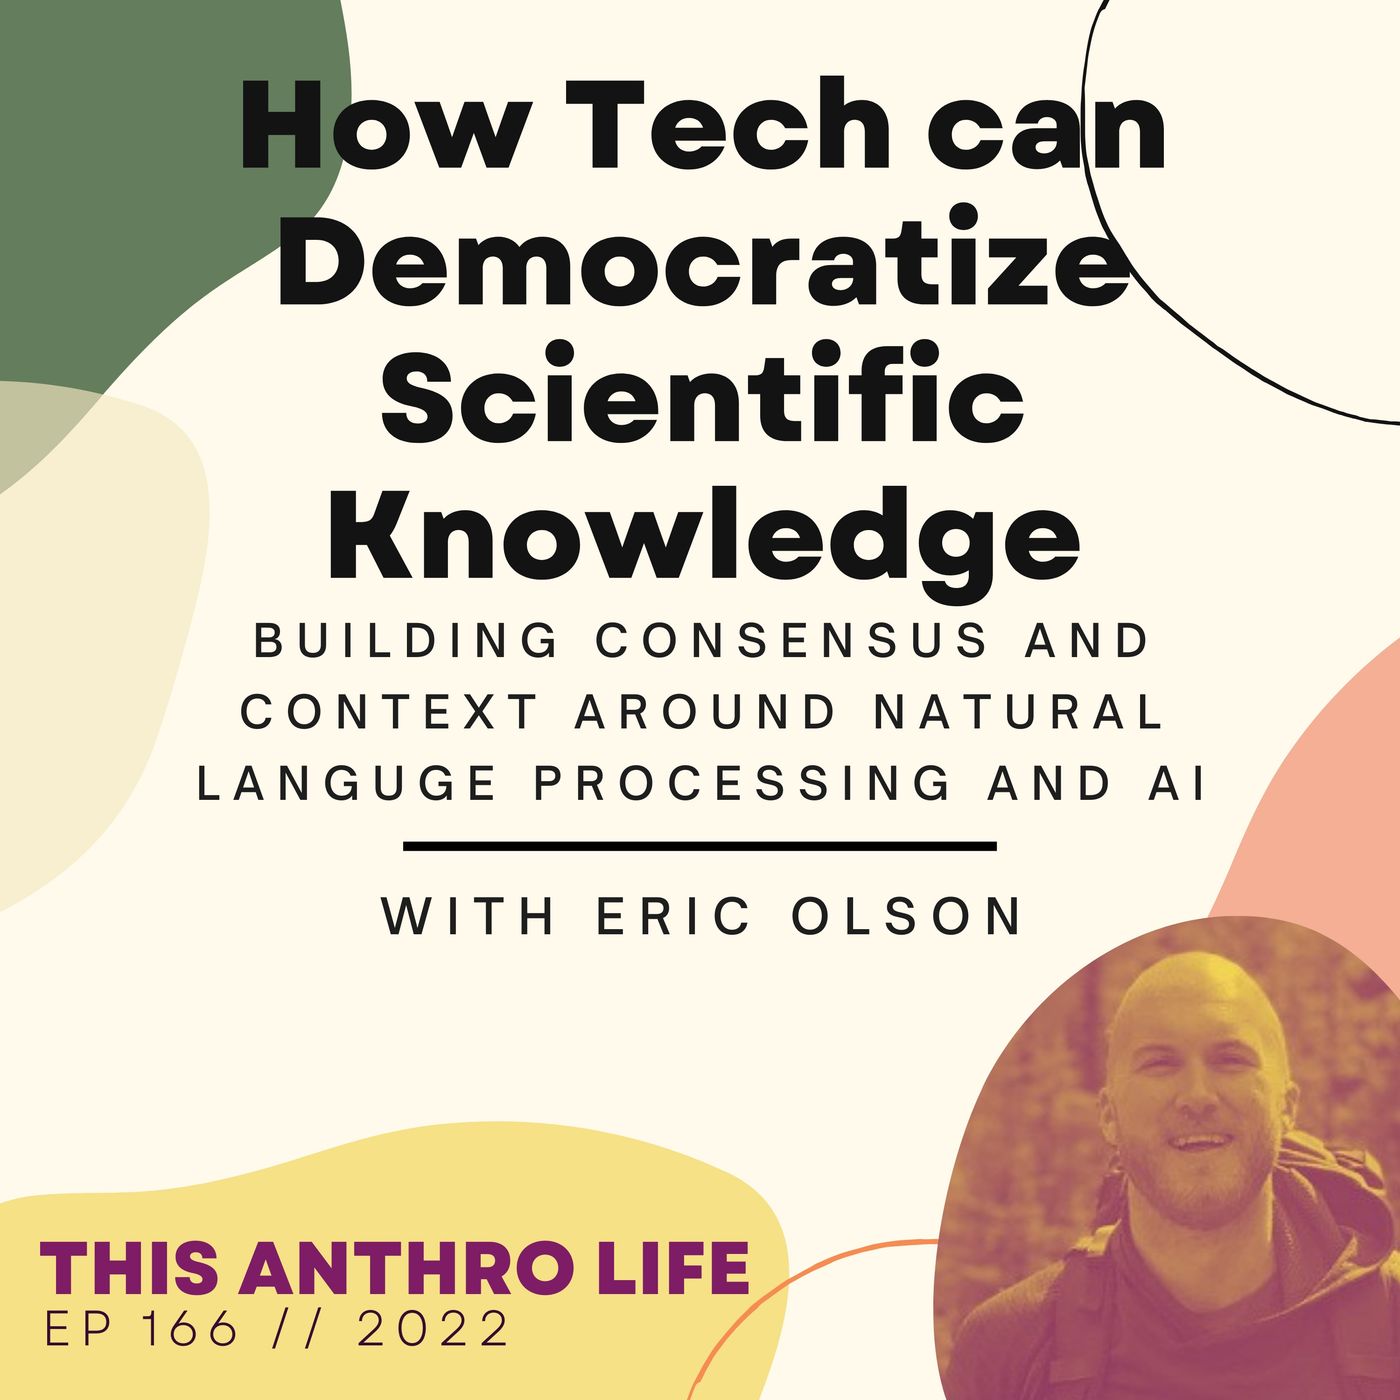 How Tech can Democratize Scientific Knowledge with Eric Olson Image